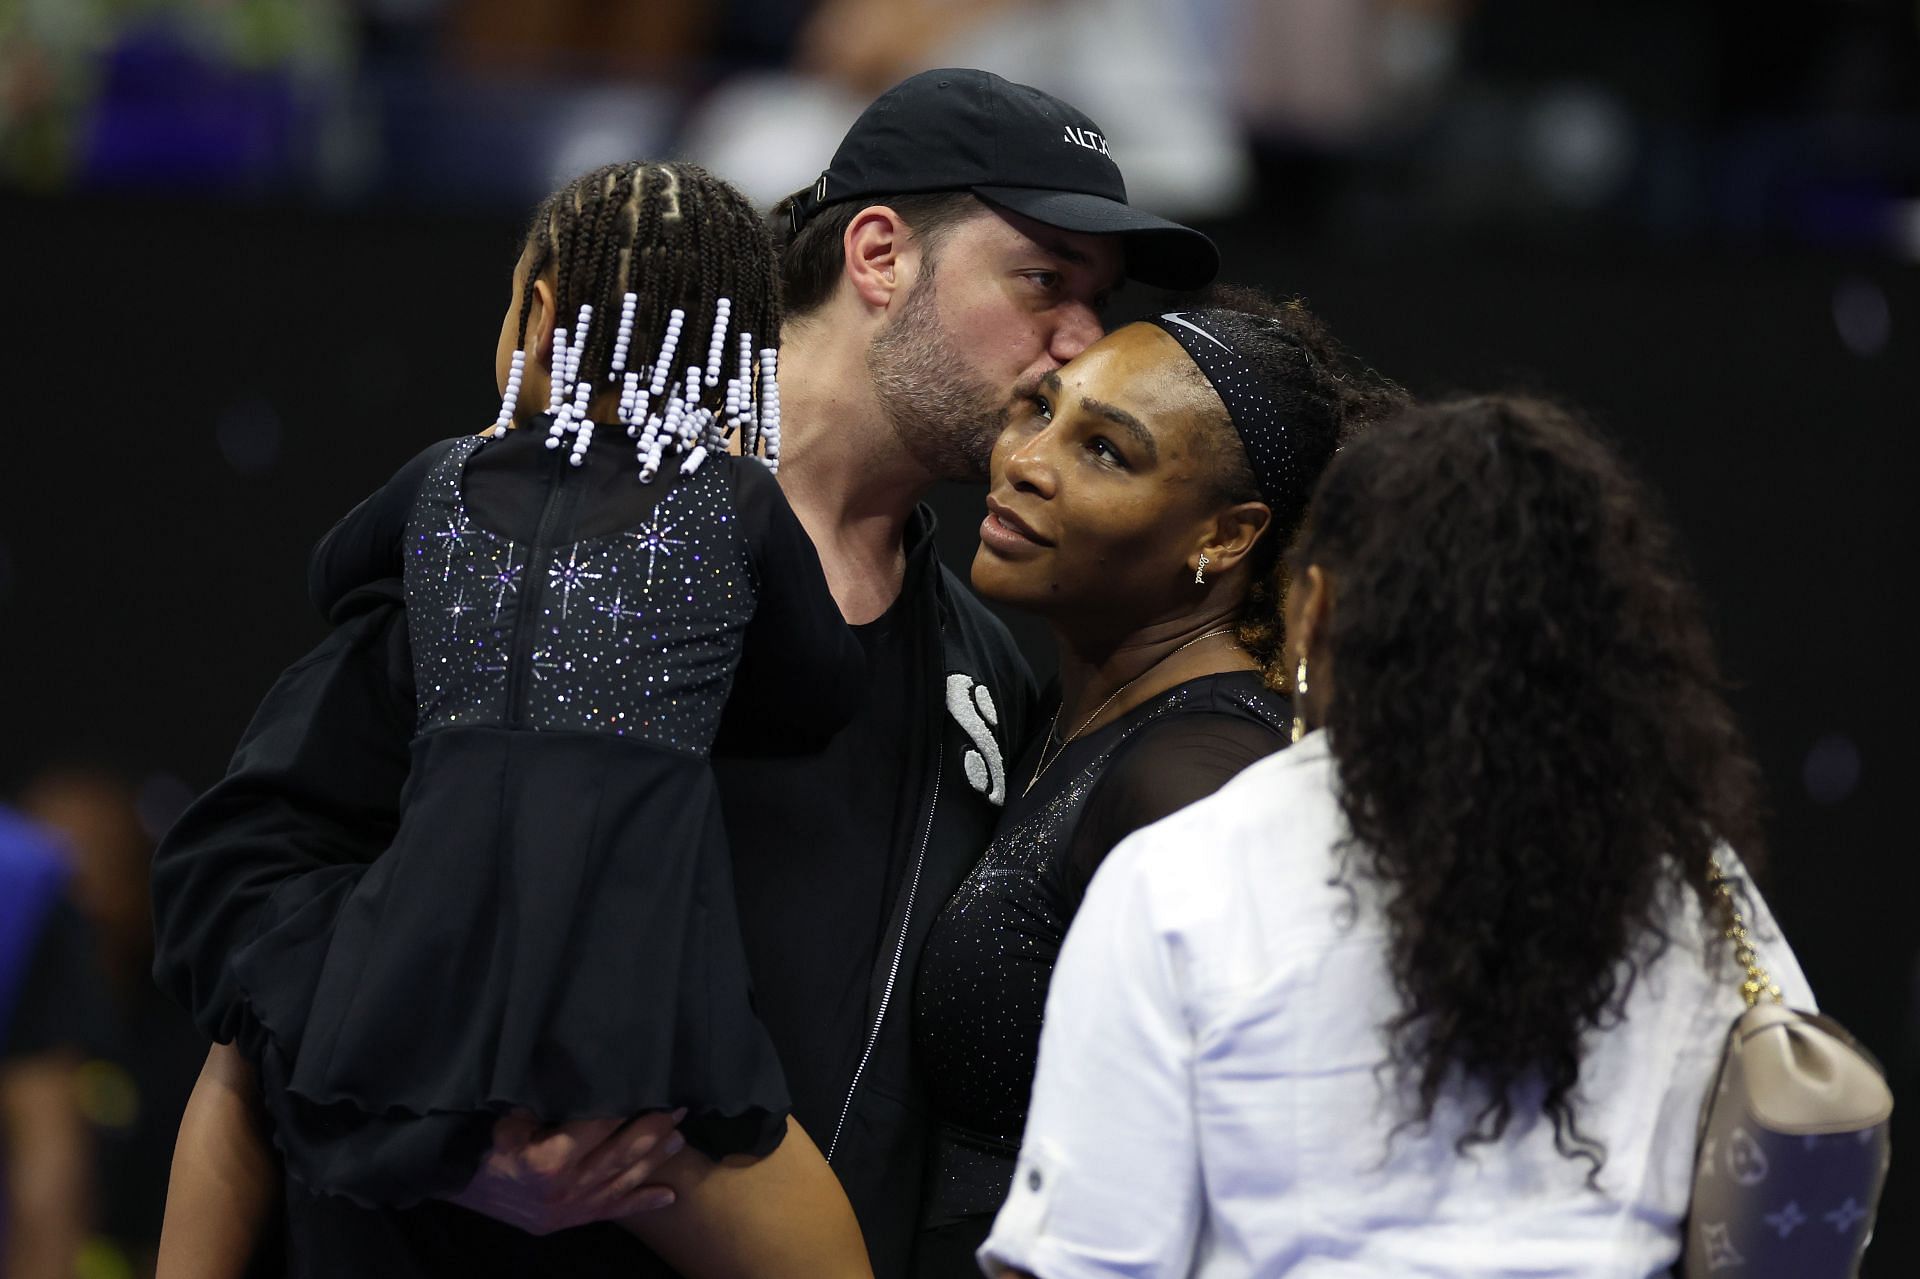 Williams pictured with husband Alexis and daughter Olympia during her retirement ceremony at US Open 2022